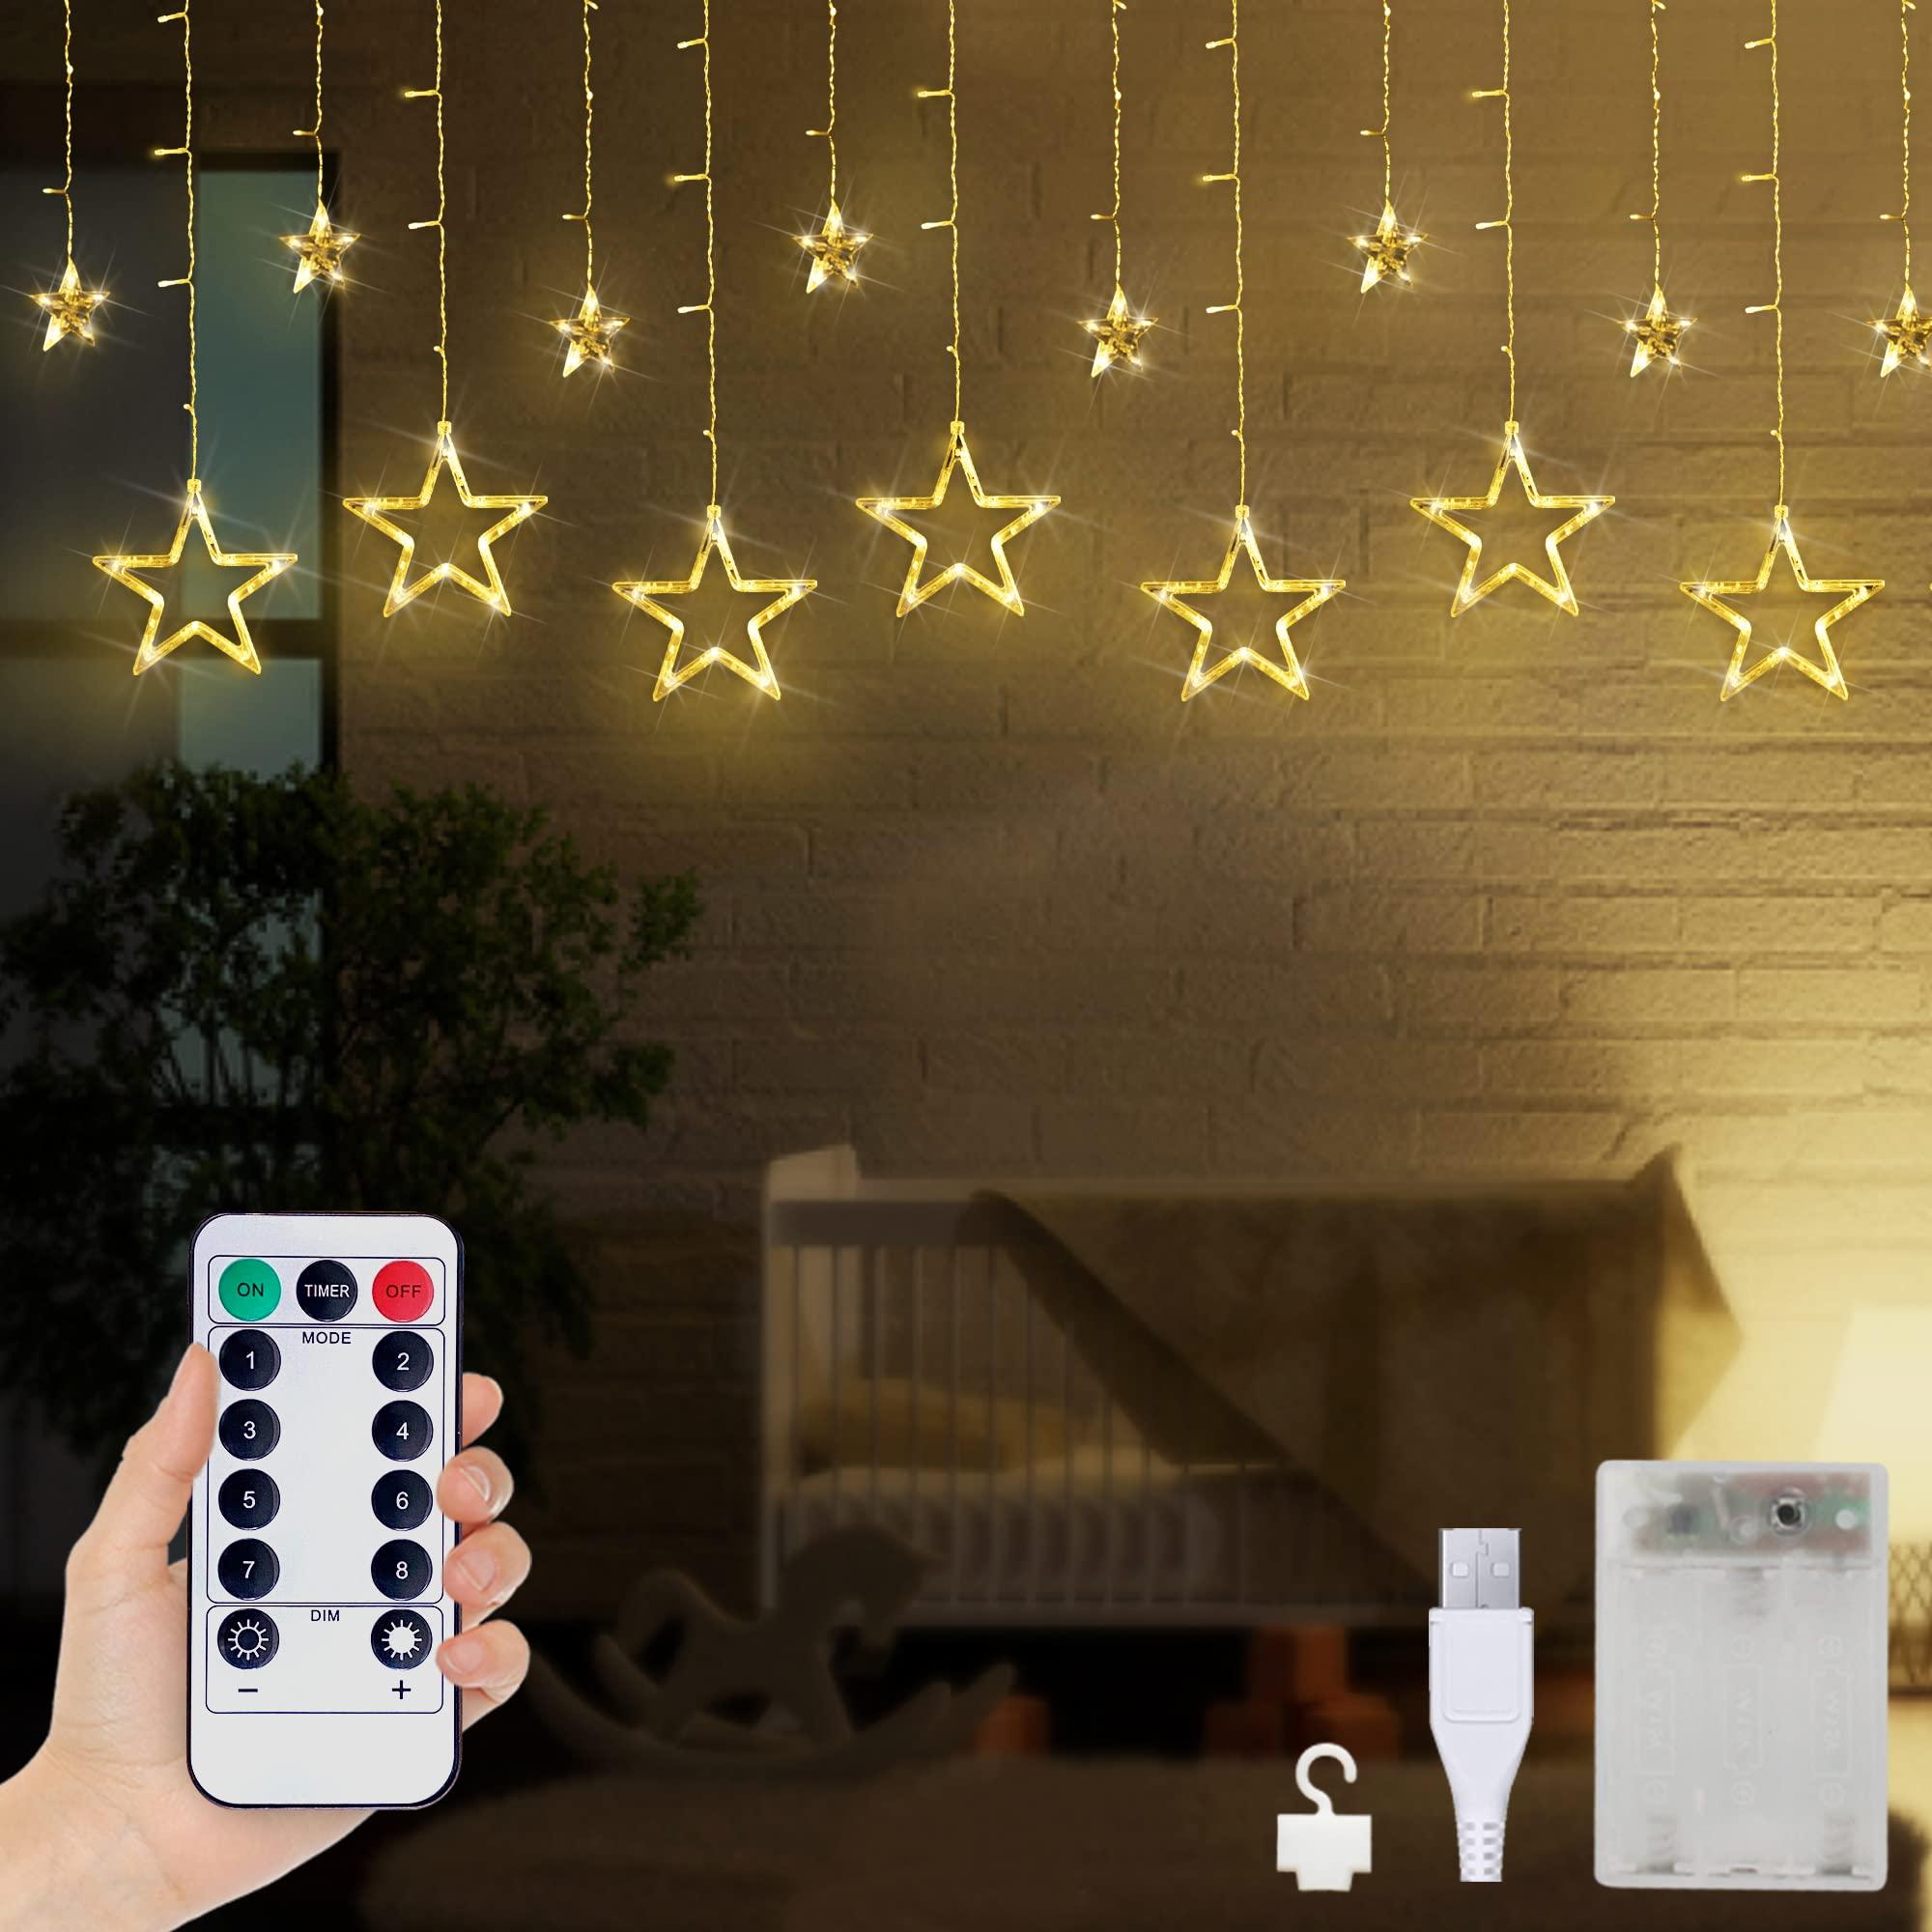 12 Star Curtain Lights with Remote Control 138 LEDs Fairy Light 8 Lighting Modes USB Powered for Bedroom Garden Party Wedding Christmas, Ideale Gift for Family Friends (Warm White) 1